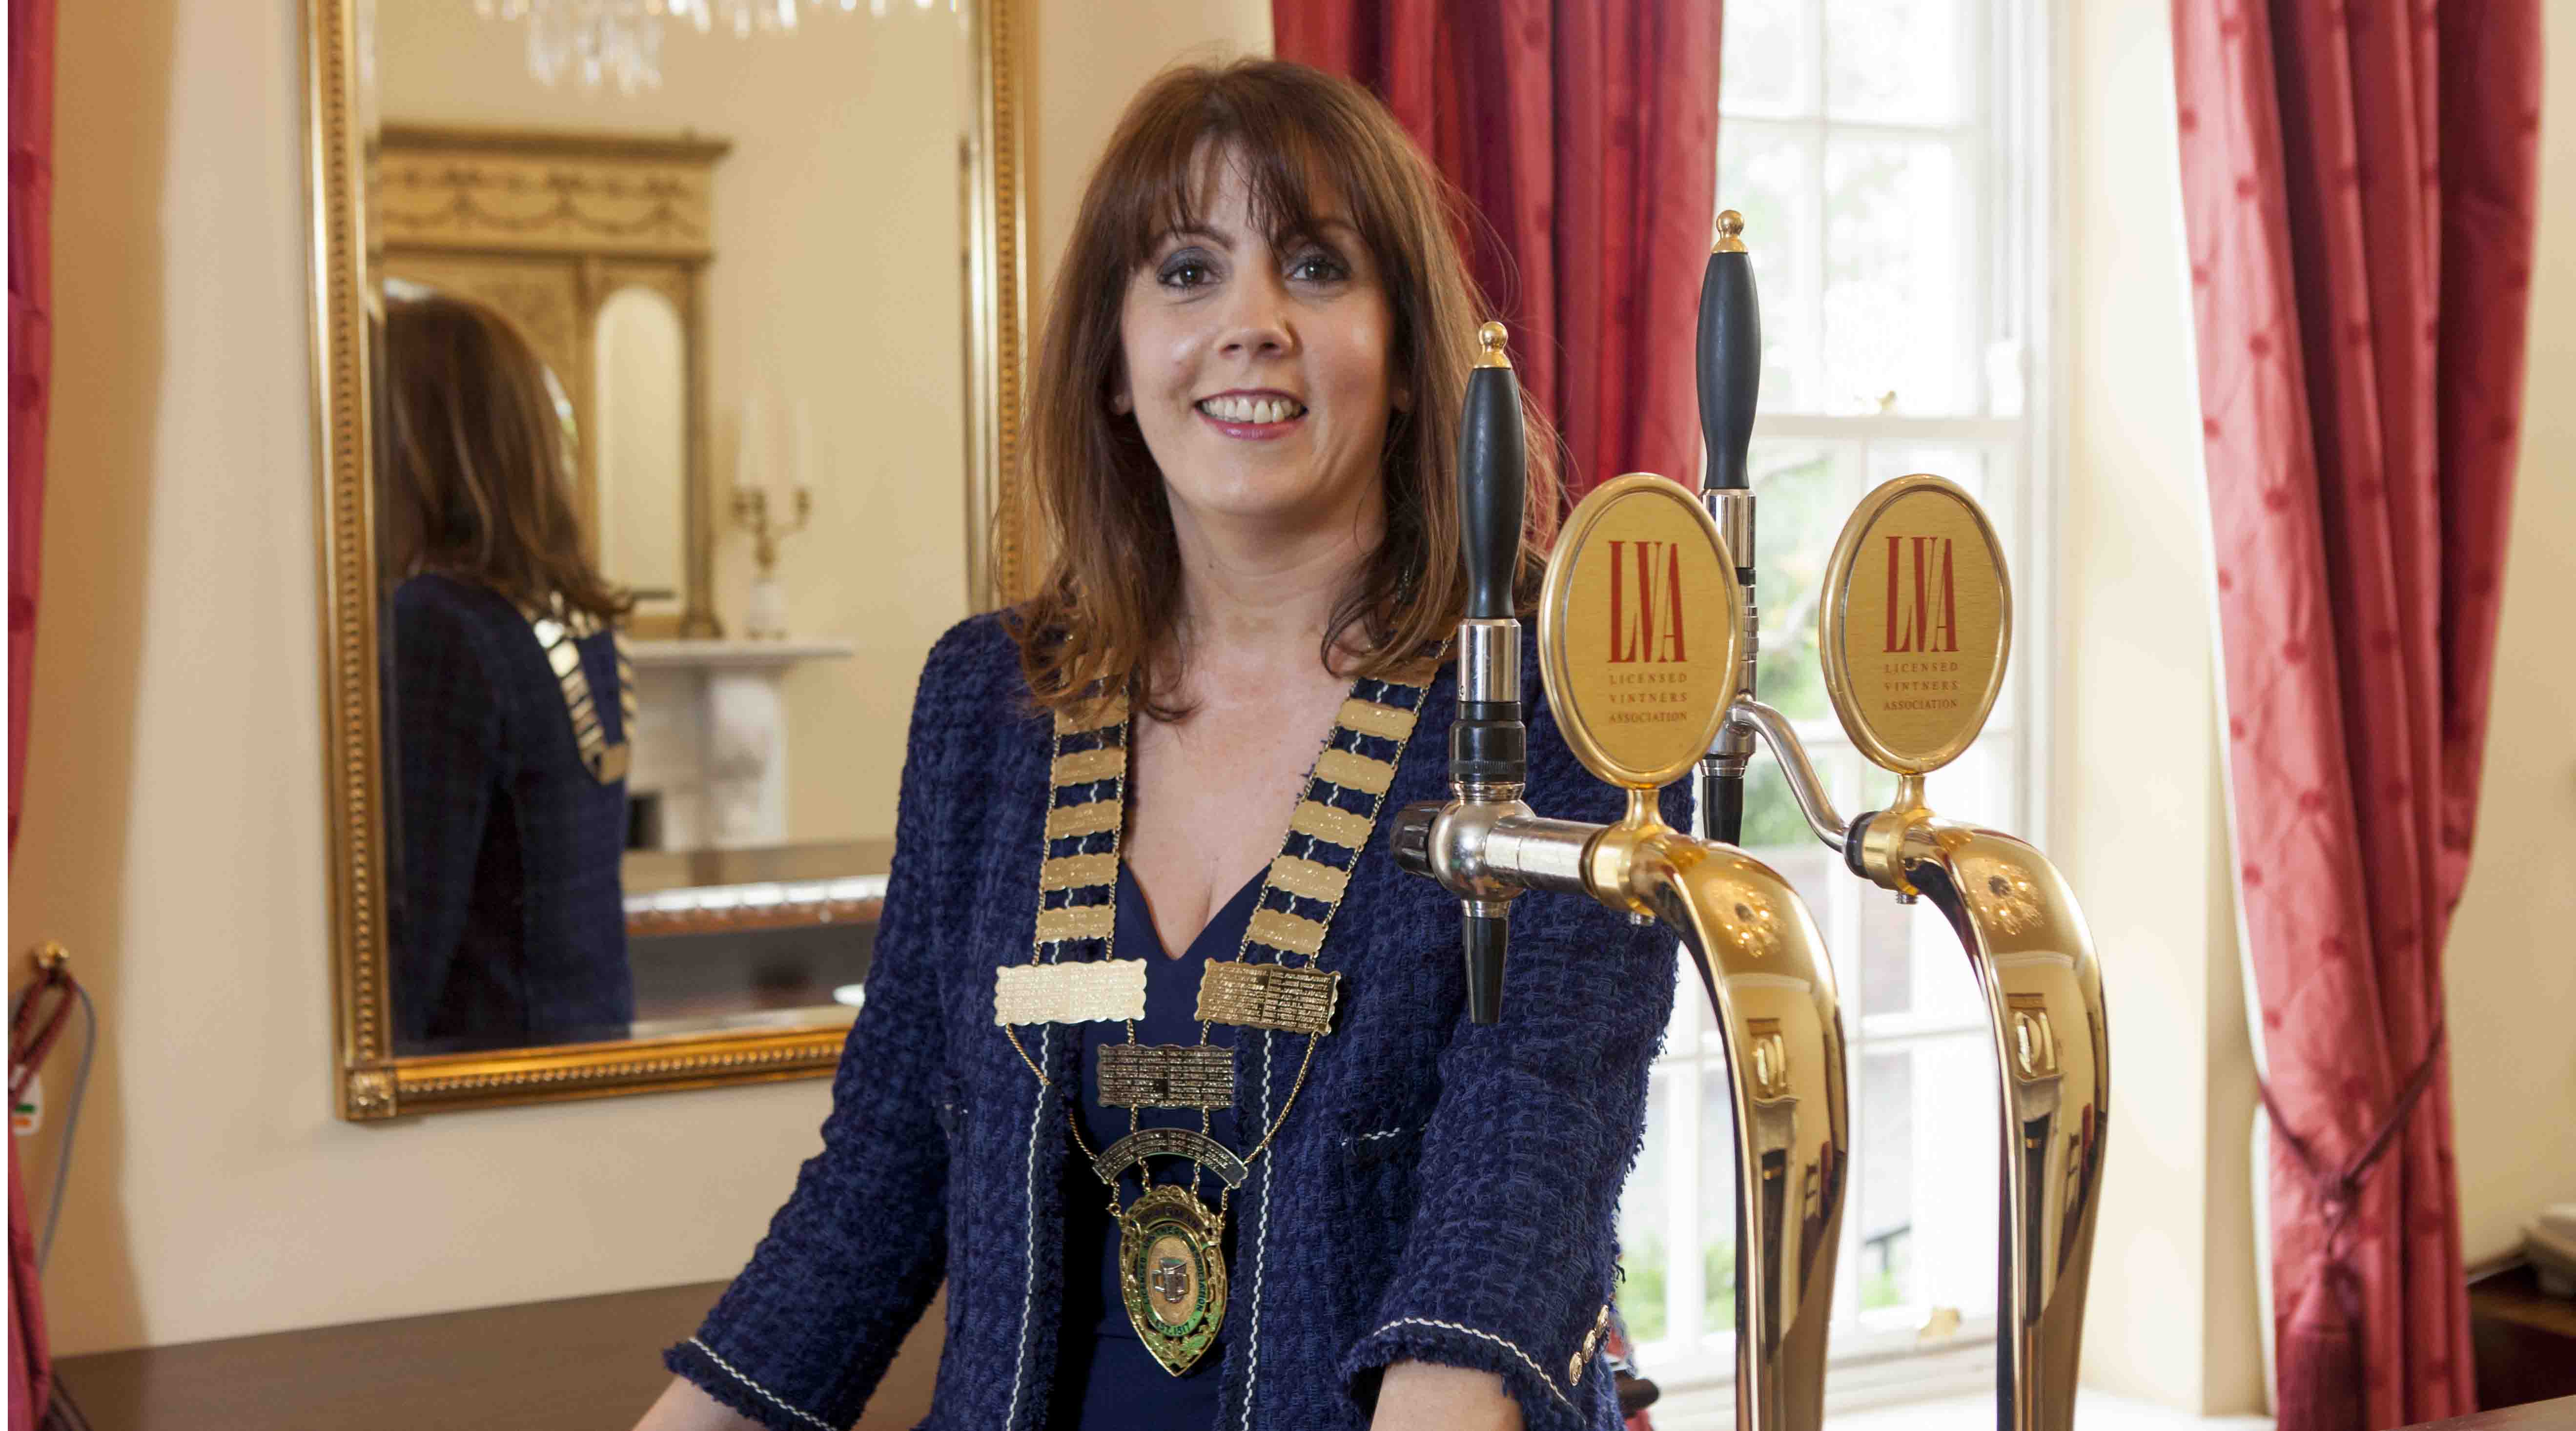 “We employ a serious amount of people and make a tremendous contribution to the Exchequer yet the perception of our industry has been poor for the last number of years, not least because of alcohol abuse. “We know where the real issues lie – and they’re not with the pub.”